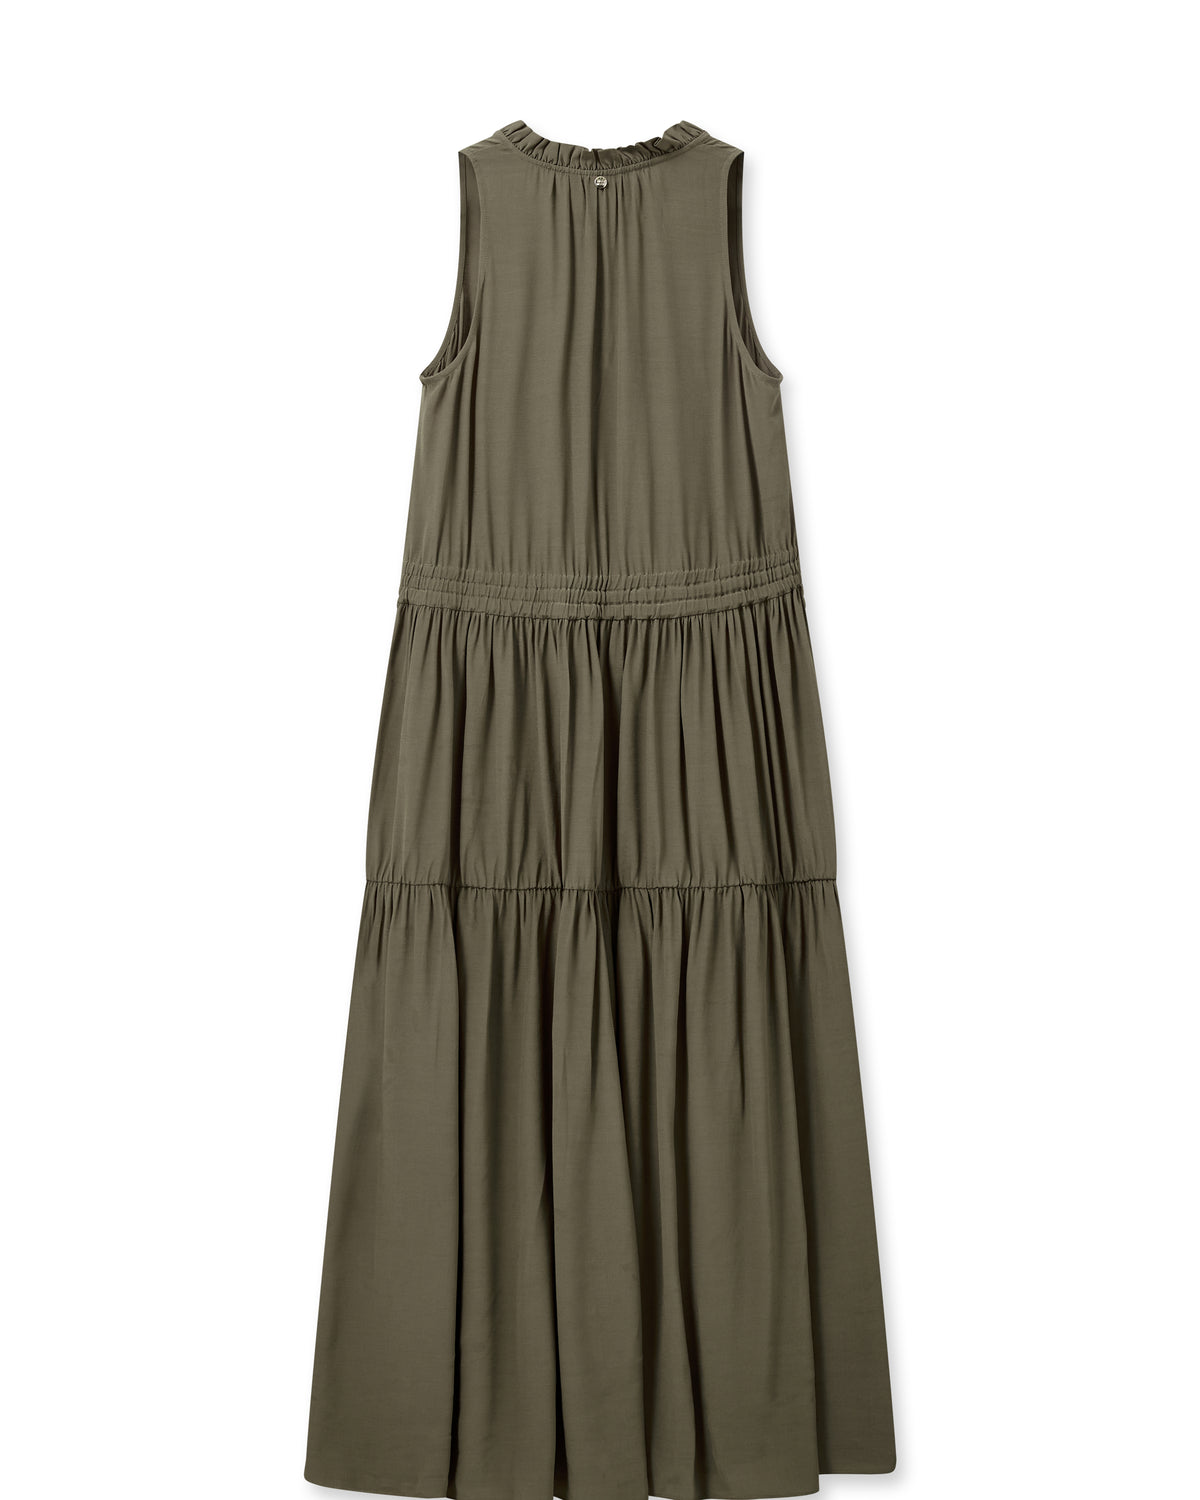 Khaki green tiered dress with small ruffle detail at the neck and a elasticated waist